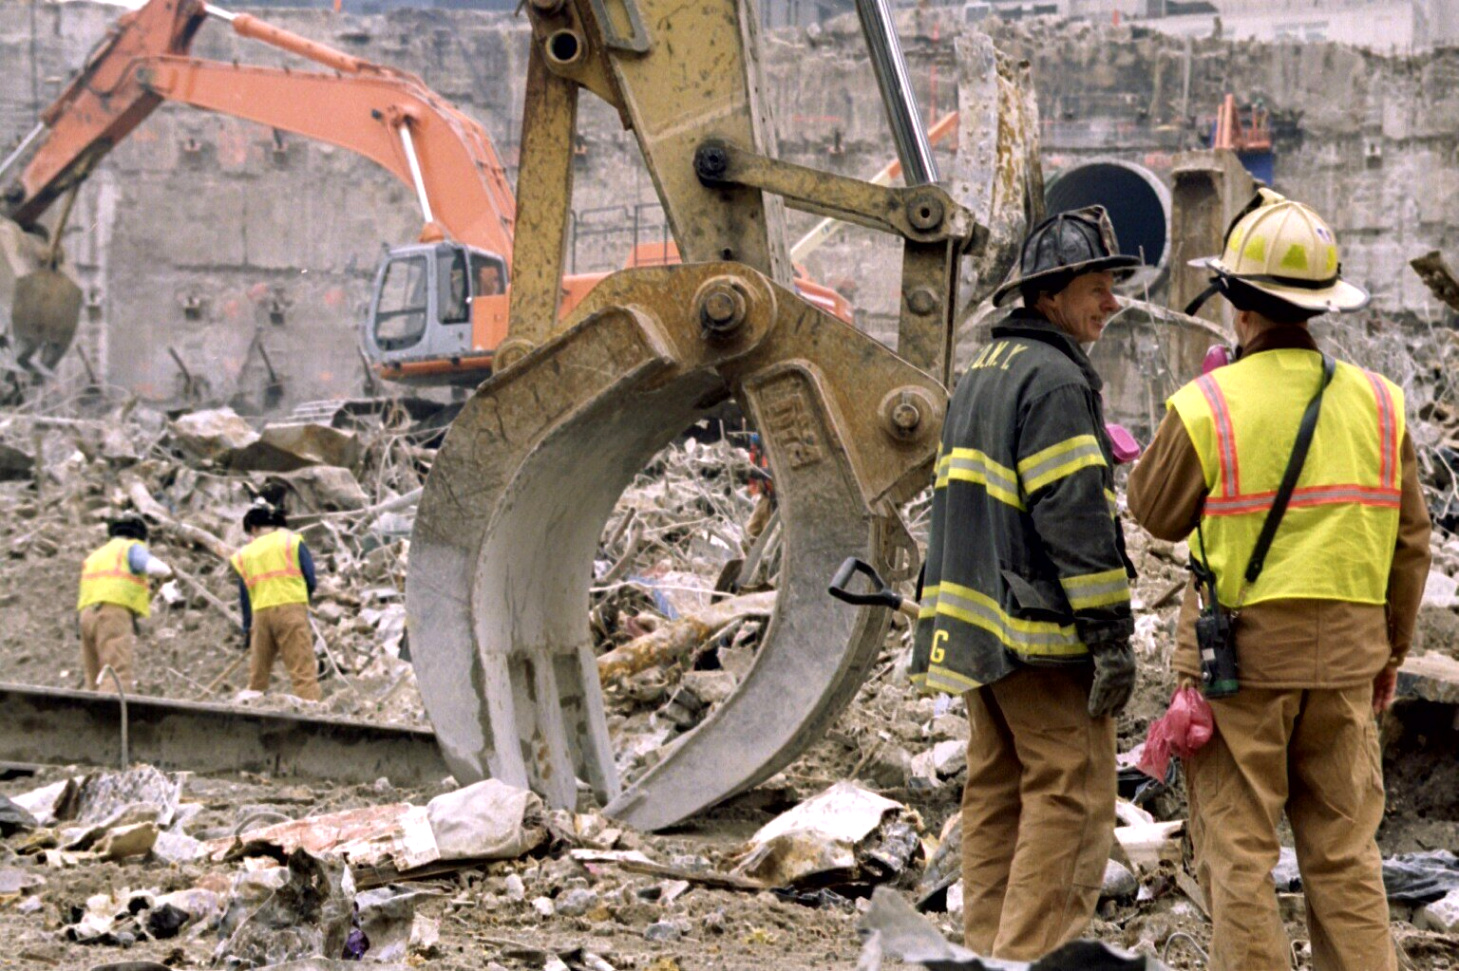 nyc construction accident lawyers discuss demolition work